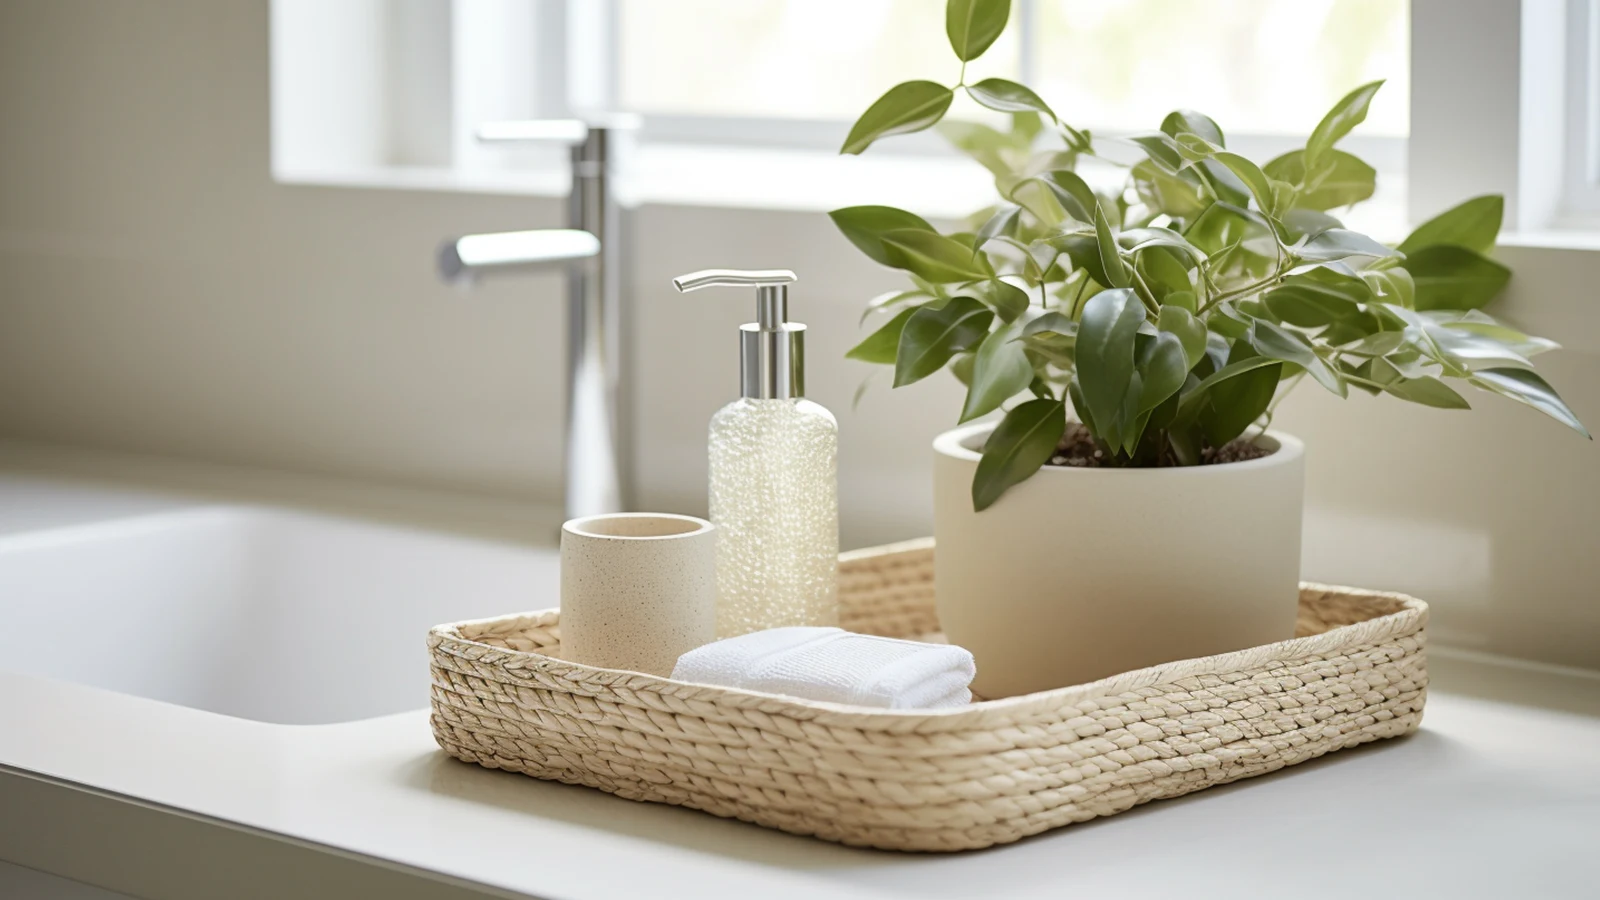 Small bathroom counter decorating ideas: a bathroom with a plant on a tray next to a sink.